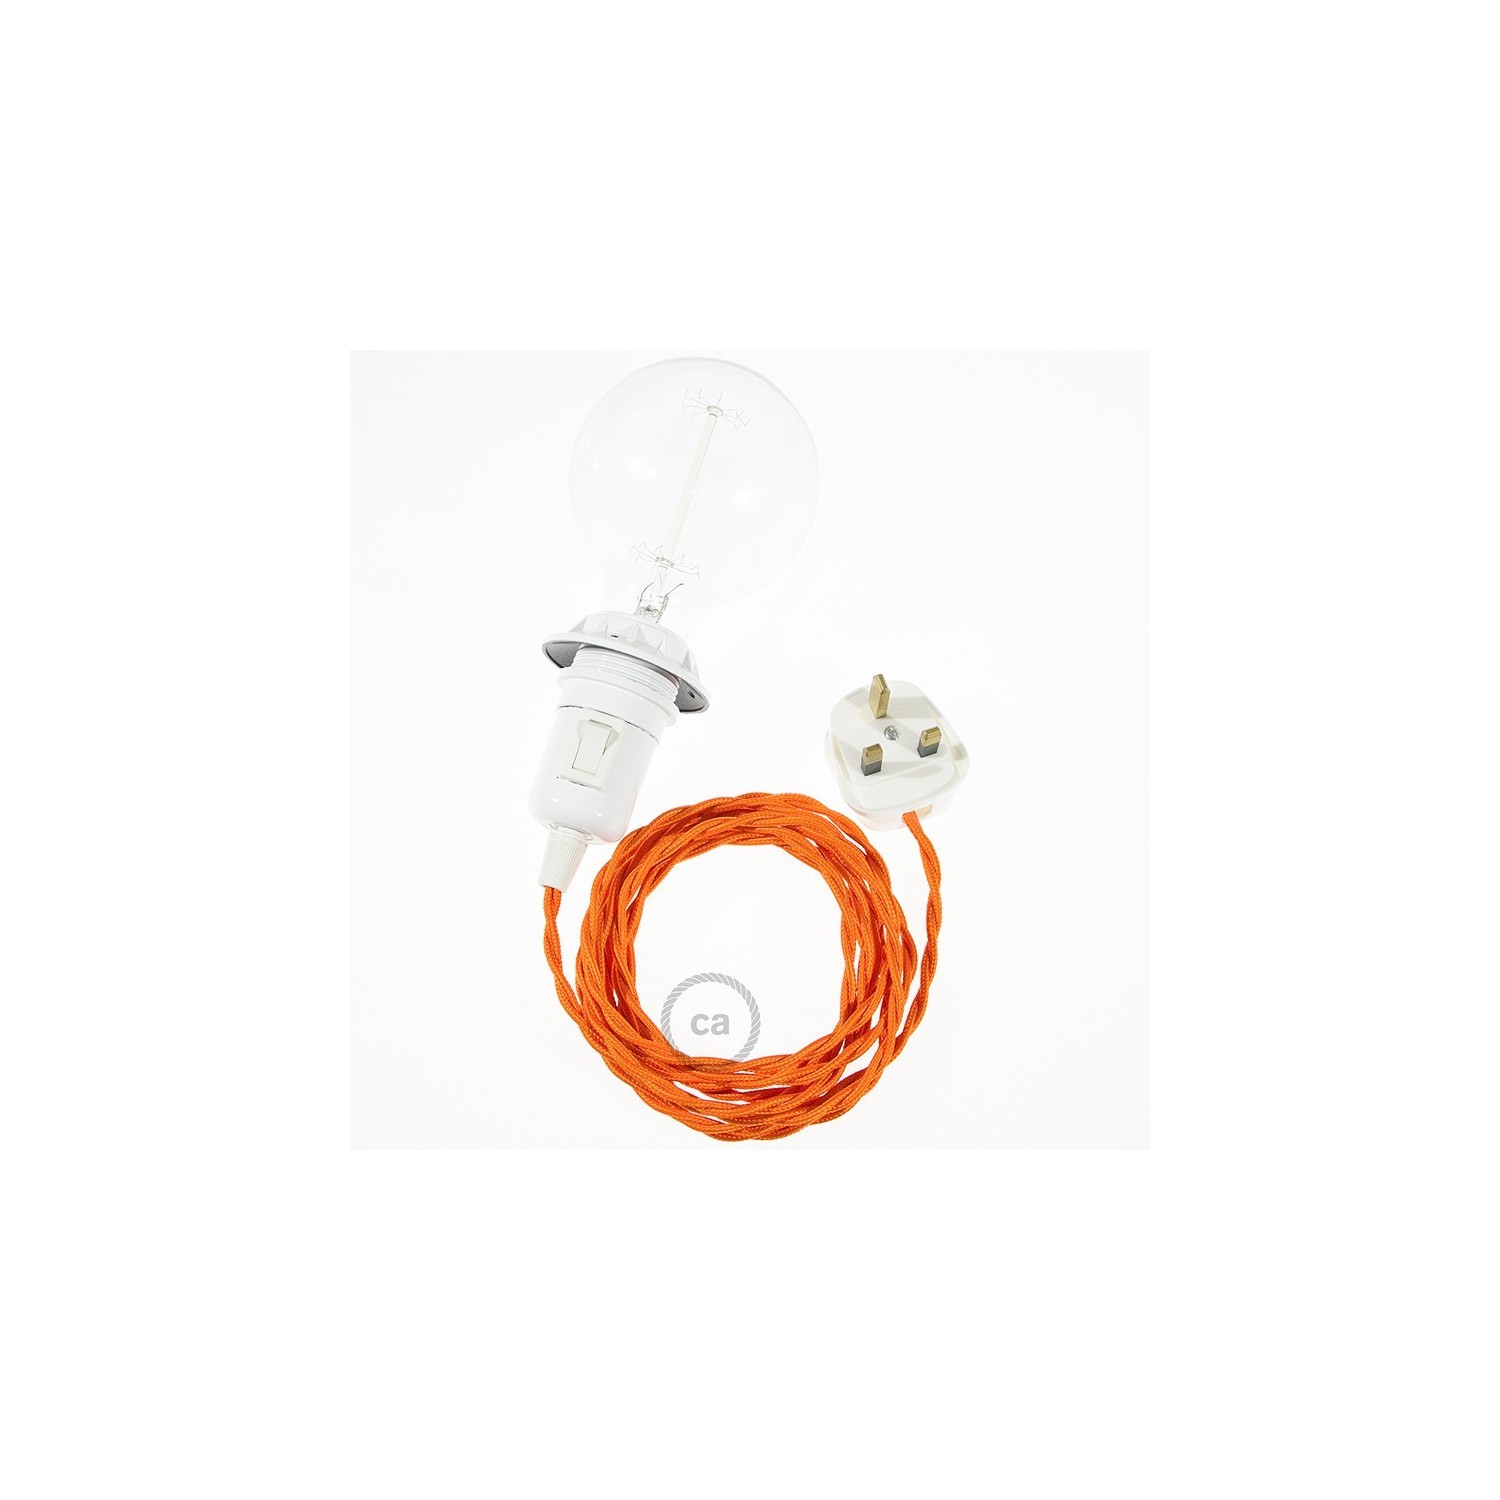 Create your TM15 Orange Rayon Snake for lampshade and bring the light wherever you want.